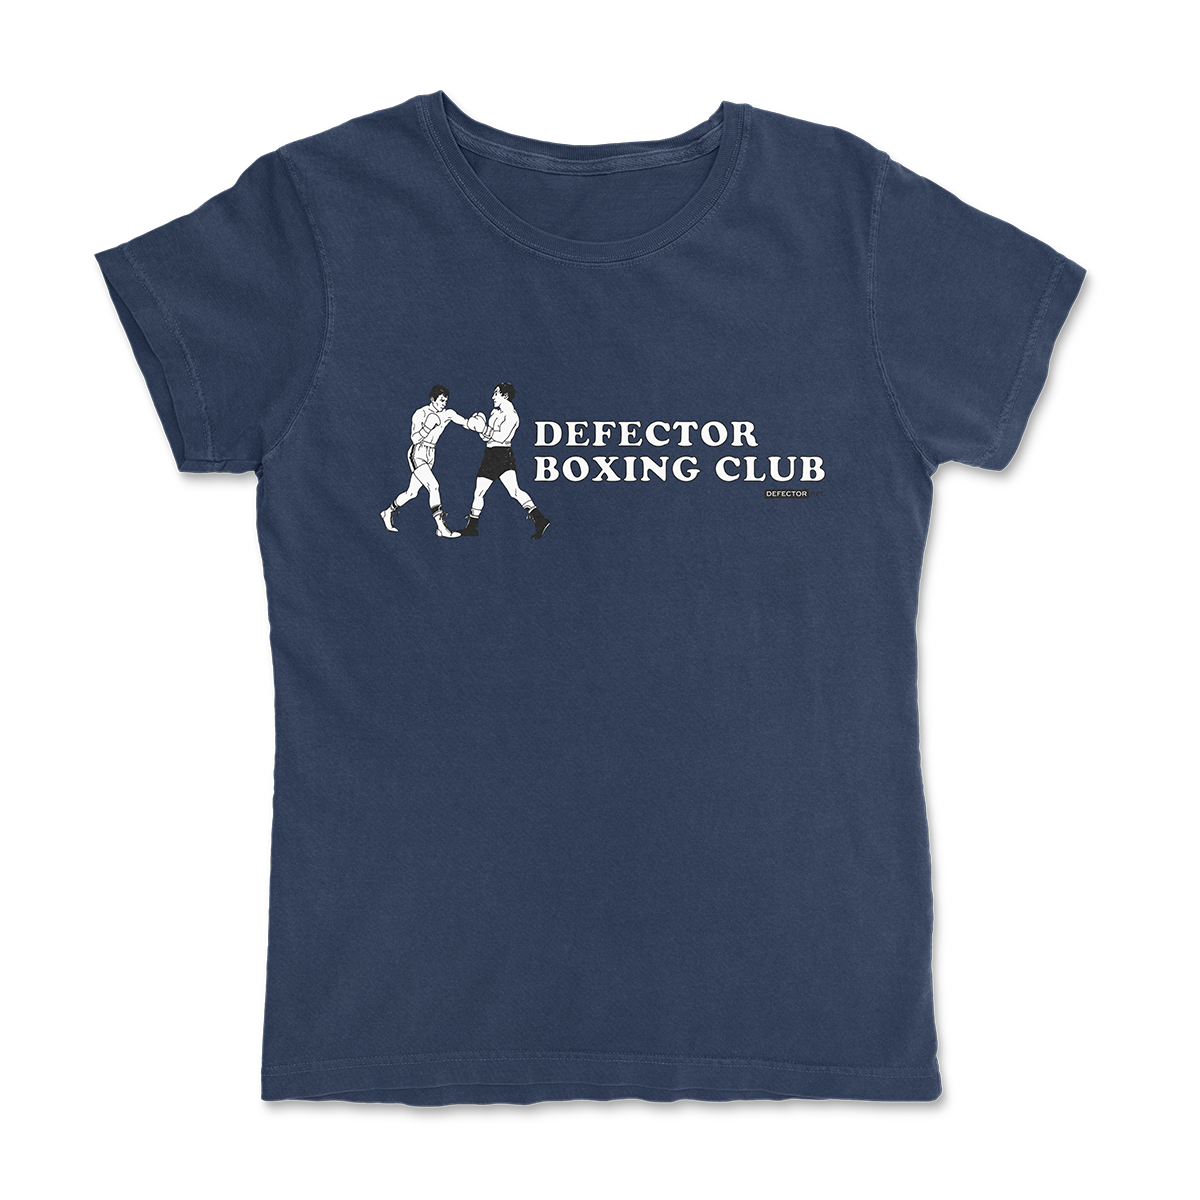 Defector shirt that says “DEFECTOR BOXING CLUB.” Features clip art of boxers.  Navy shirt in ‘femme’ cut.